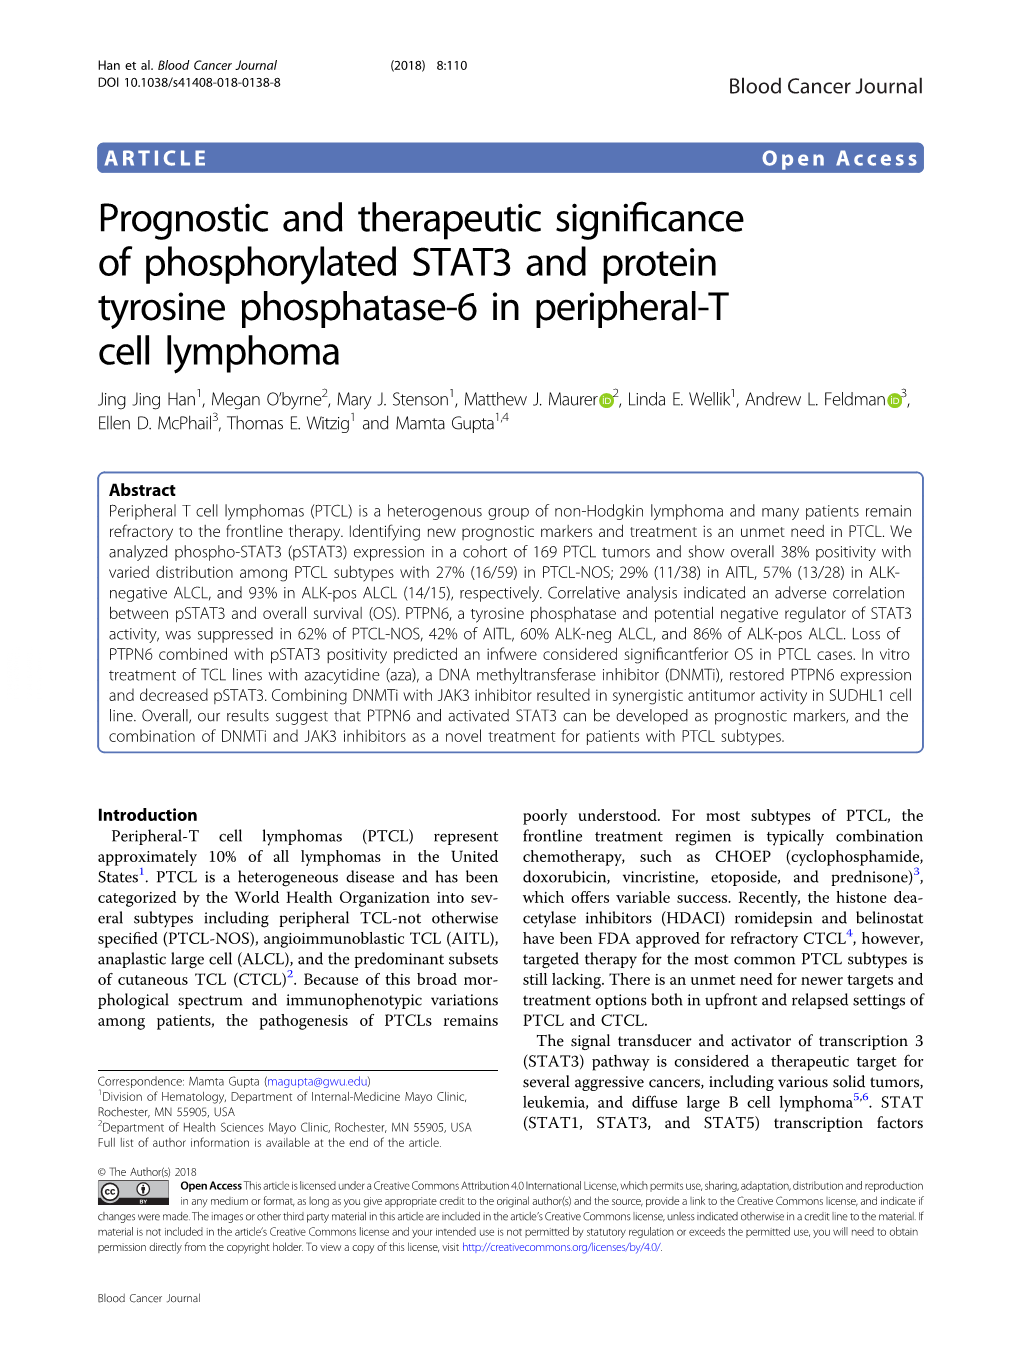 Prognostic and Therapeutic Significance of Phosphorylated